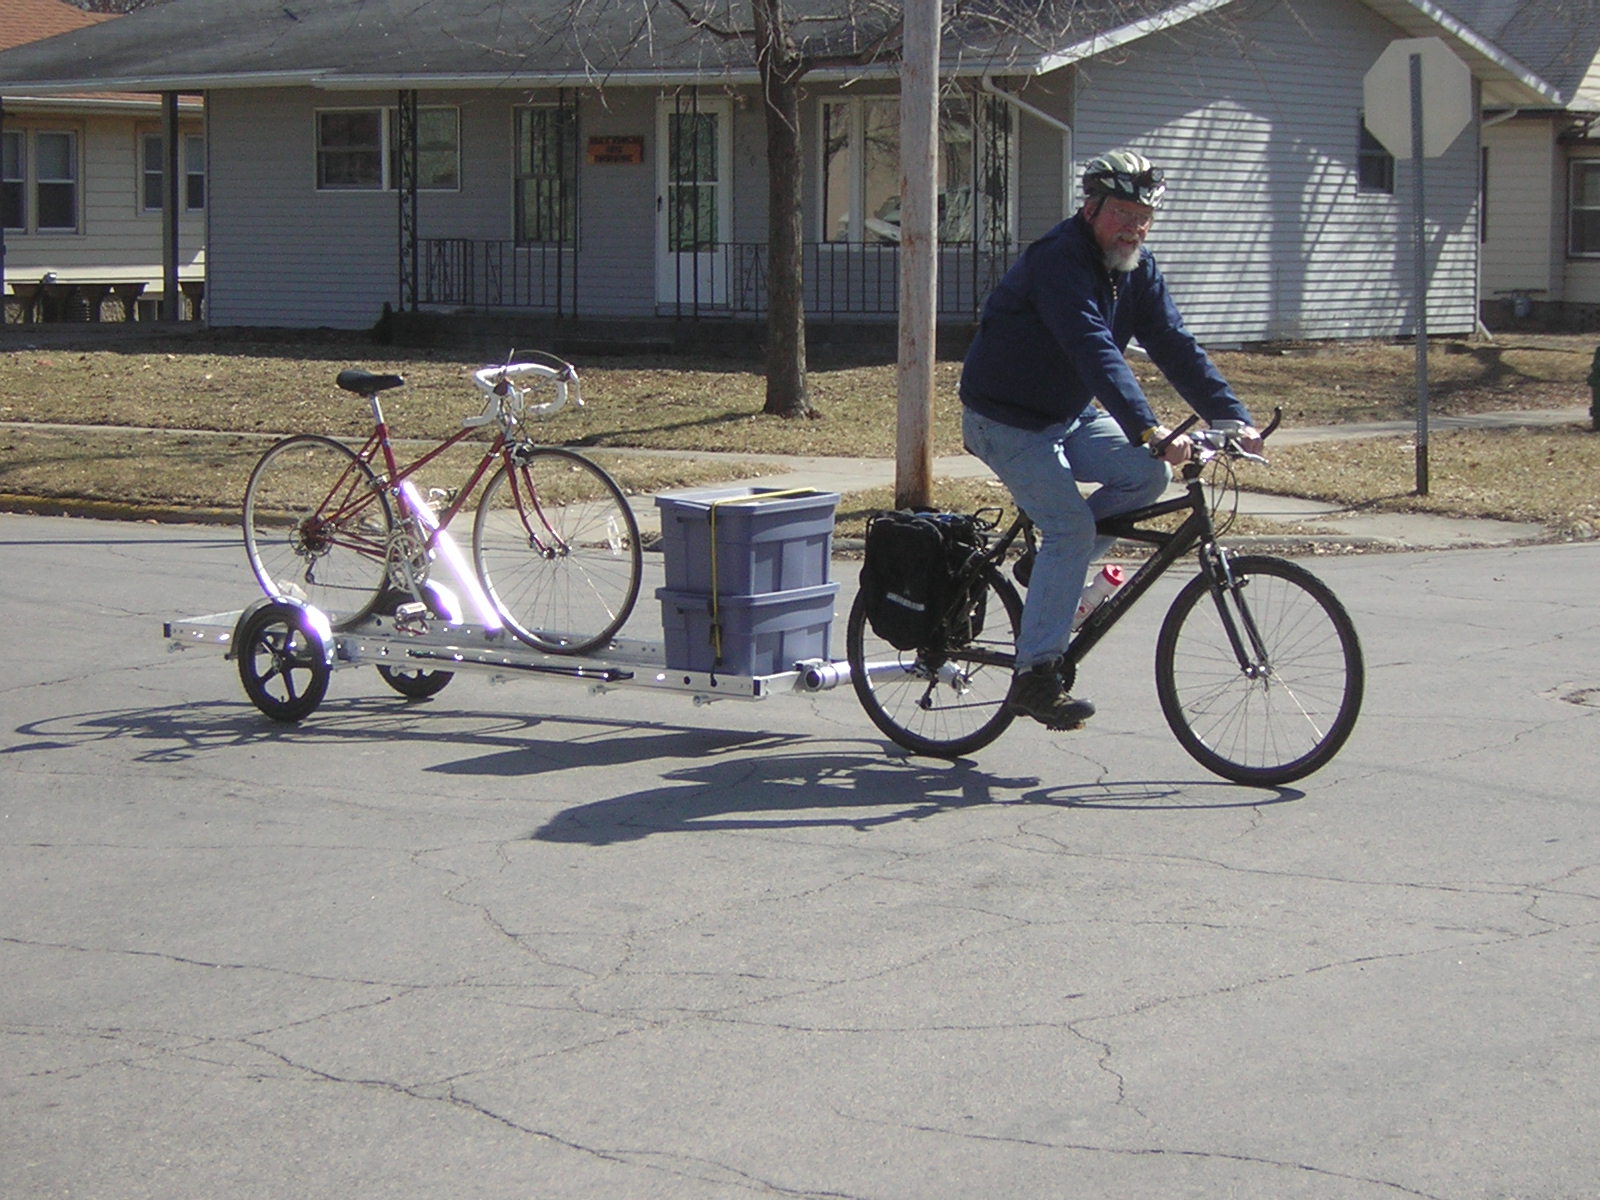 trailer for carrying bicycles